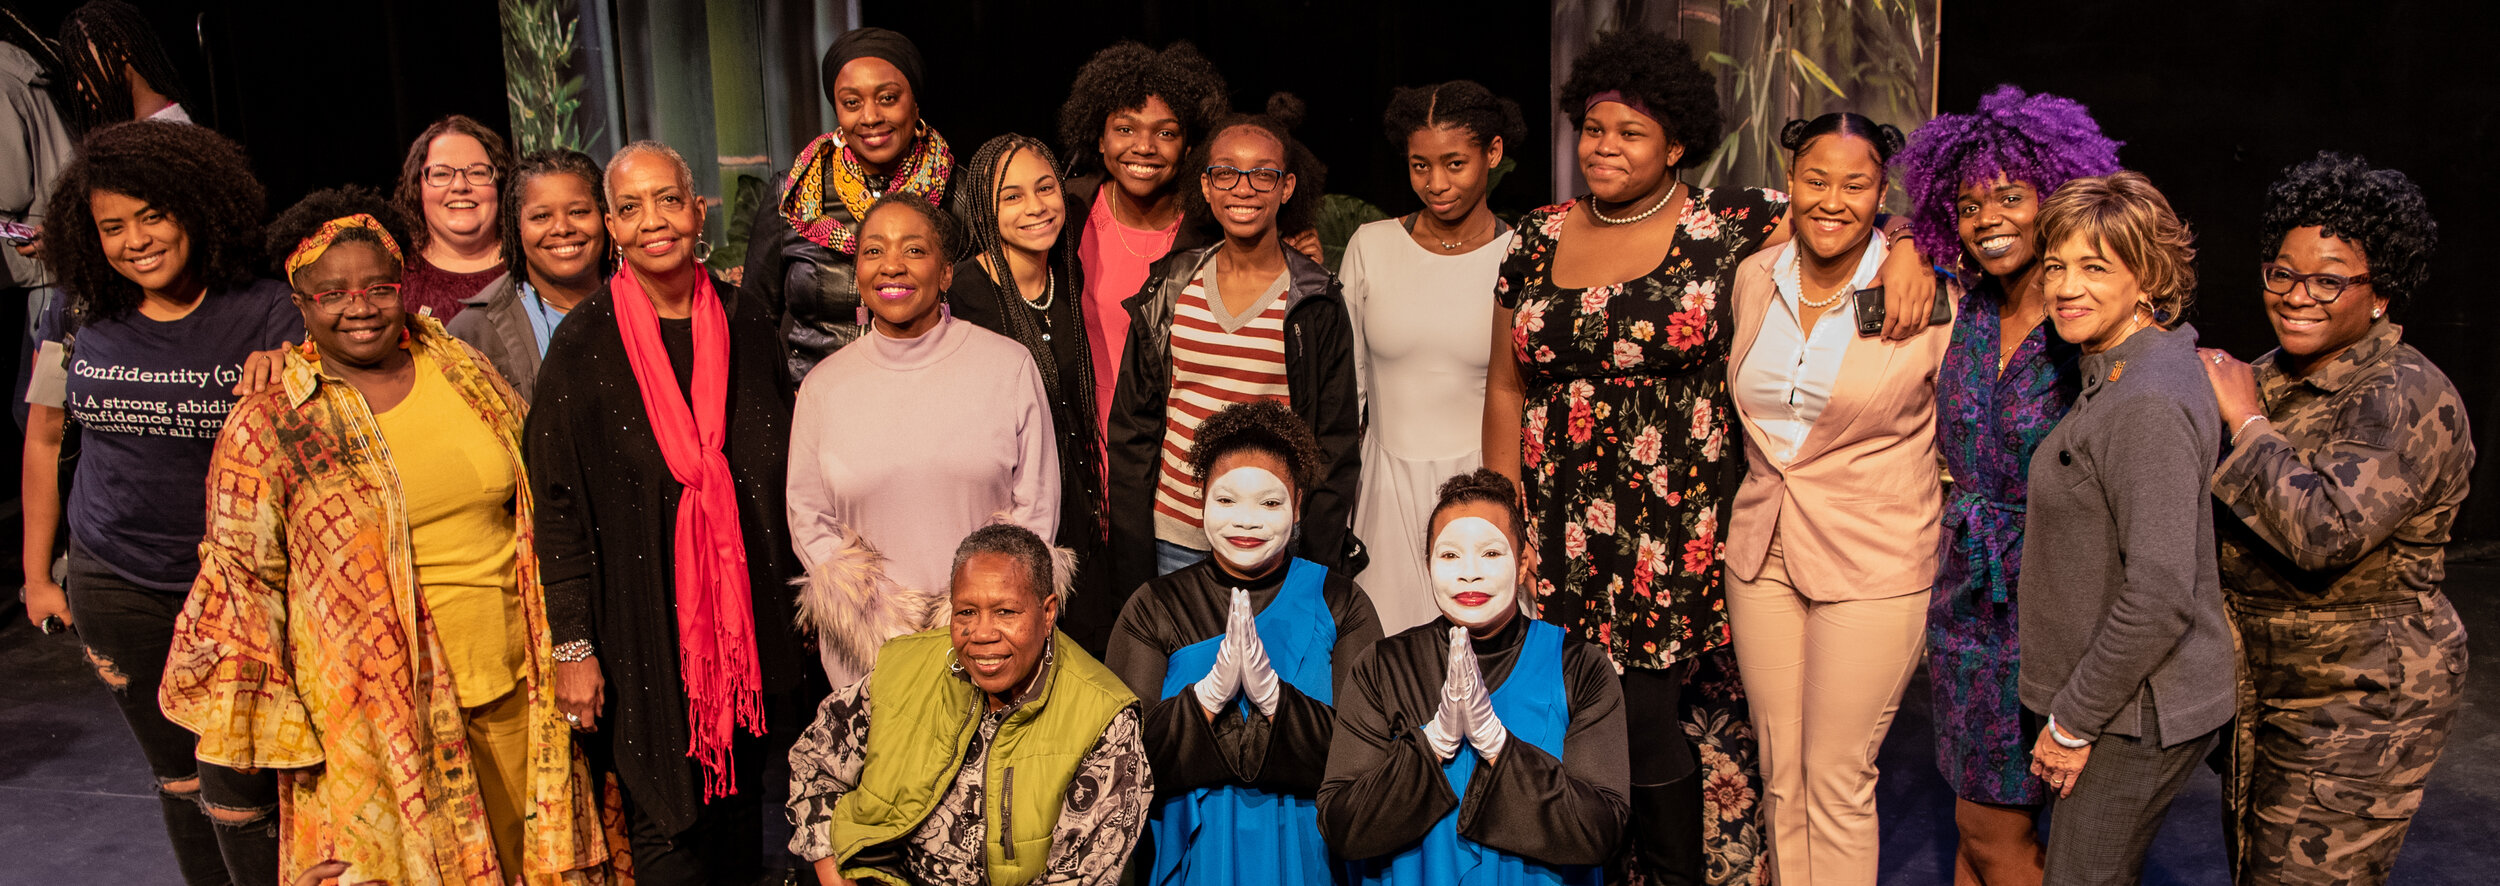  The entire cast of the Performance, the Rise Sister Rise Black Girl Think Tank, the adult sisters of the Rise Sister Rise Committee and the Performing artists at the “Who Am I As A Black Girl?” 